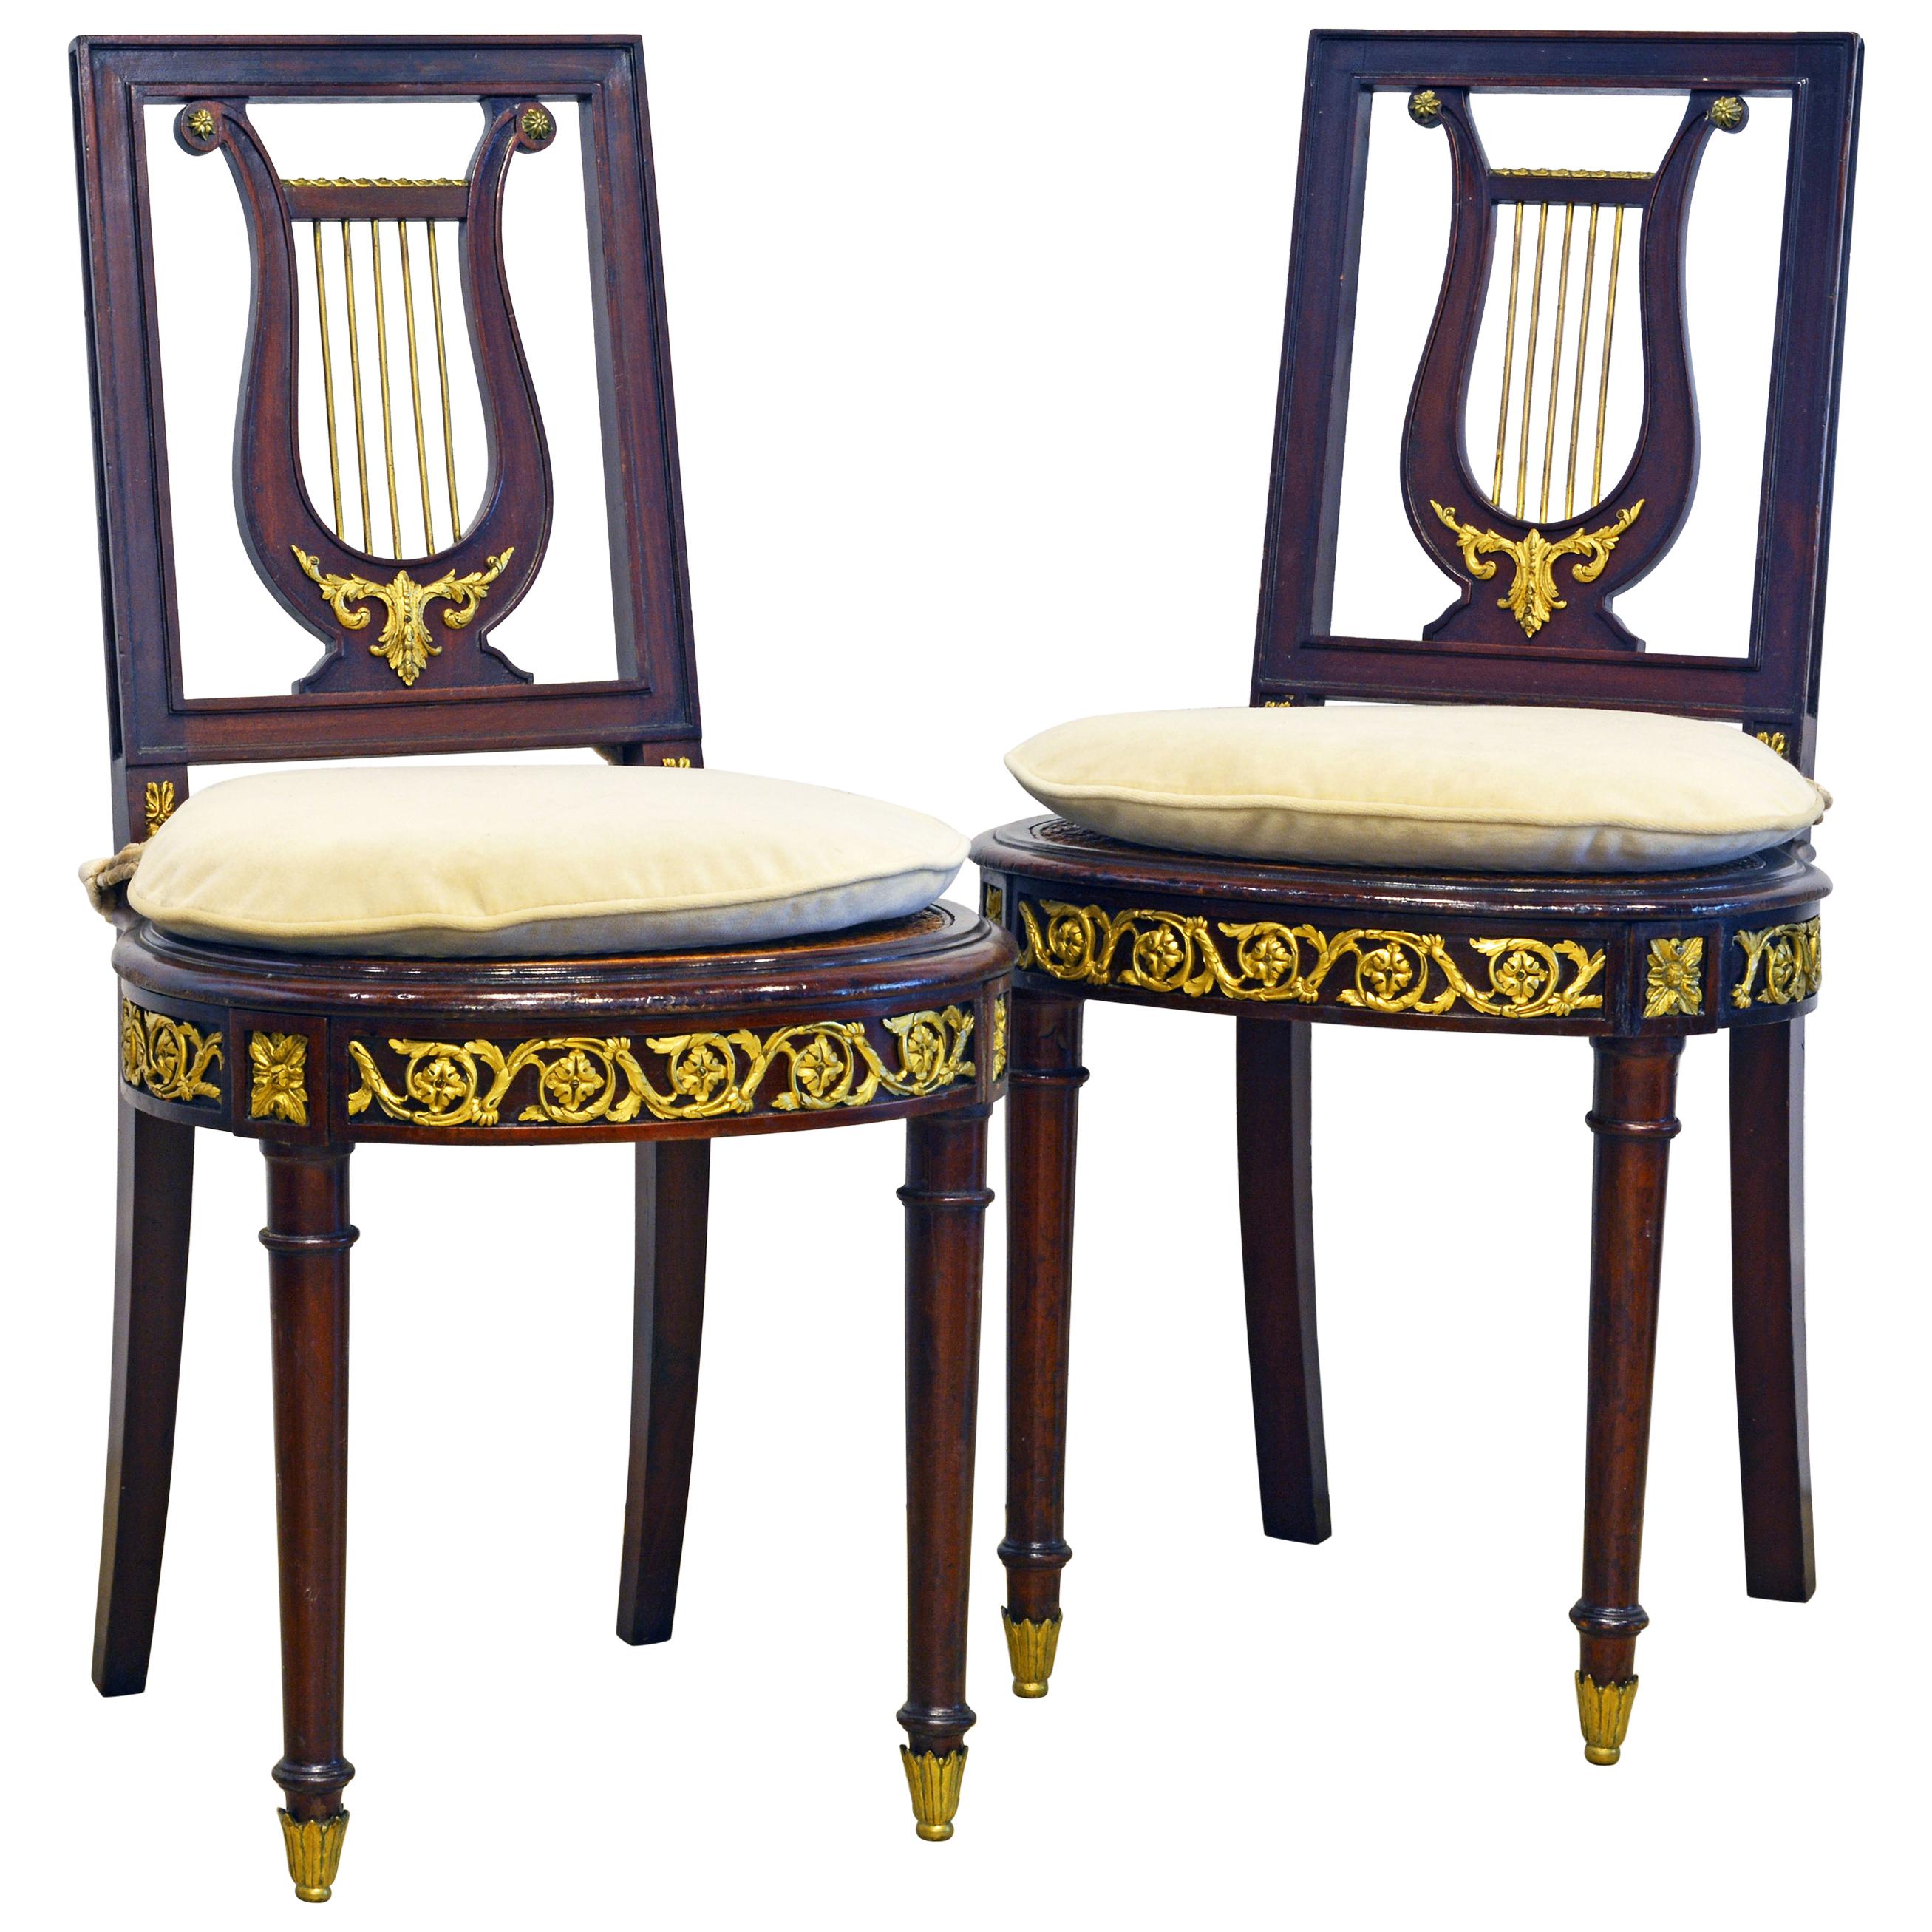 Pair of 19th Century French Neoclassical Ormolu Mounted Lyre Back Side Chairs